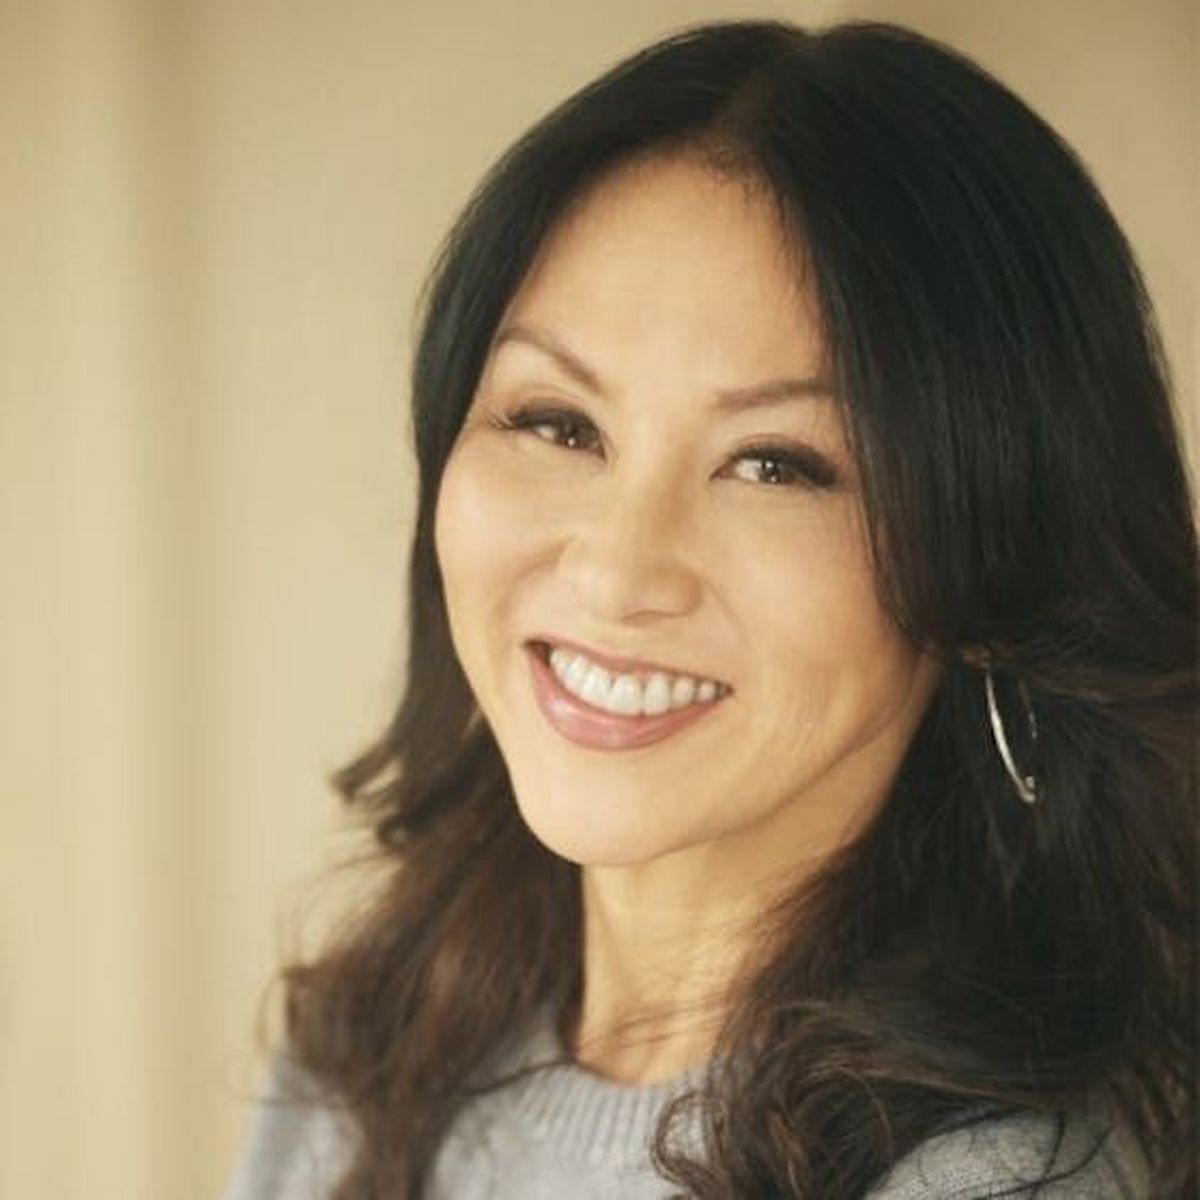 Amy Chua, author of the 2011 nonfiction book "Battle Hymn of the Tiger Mother," has published her first novel. "The Golden Gate" Is a crime novel set in 1940s San Francisco.  (Macmillian Publishers)